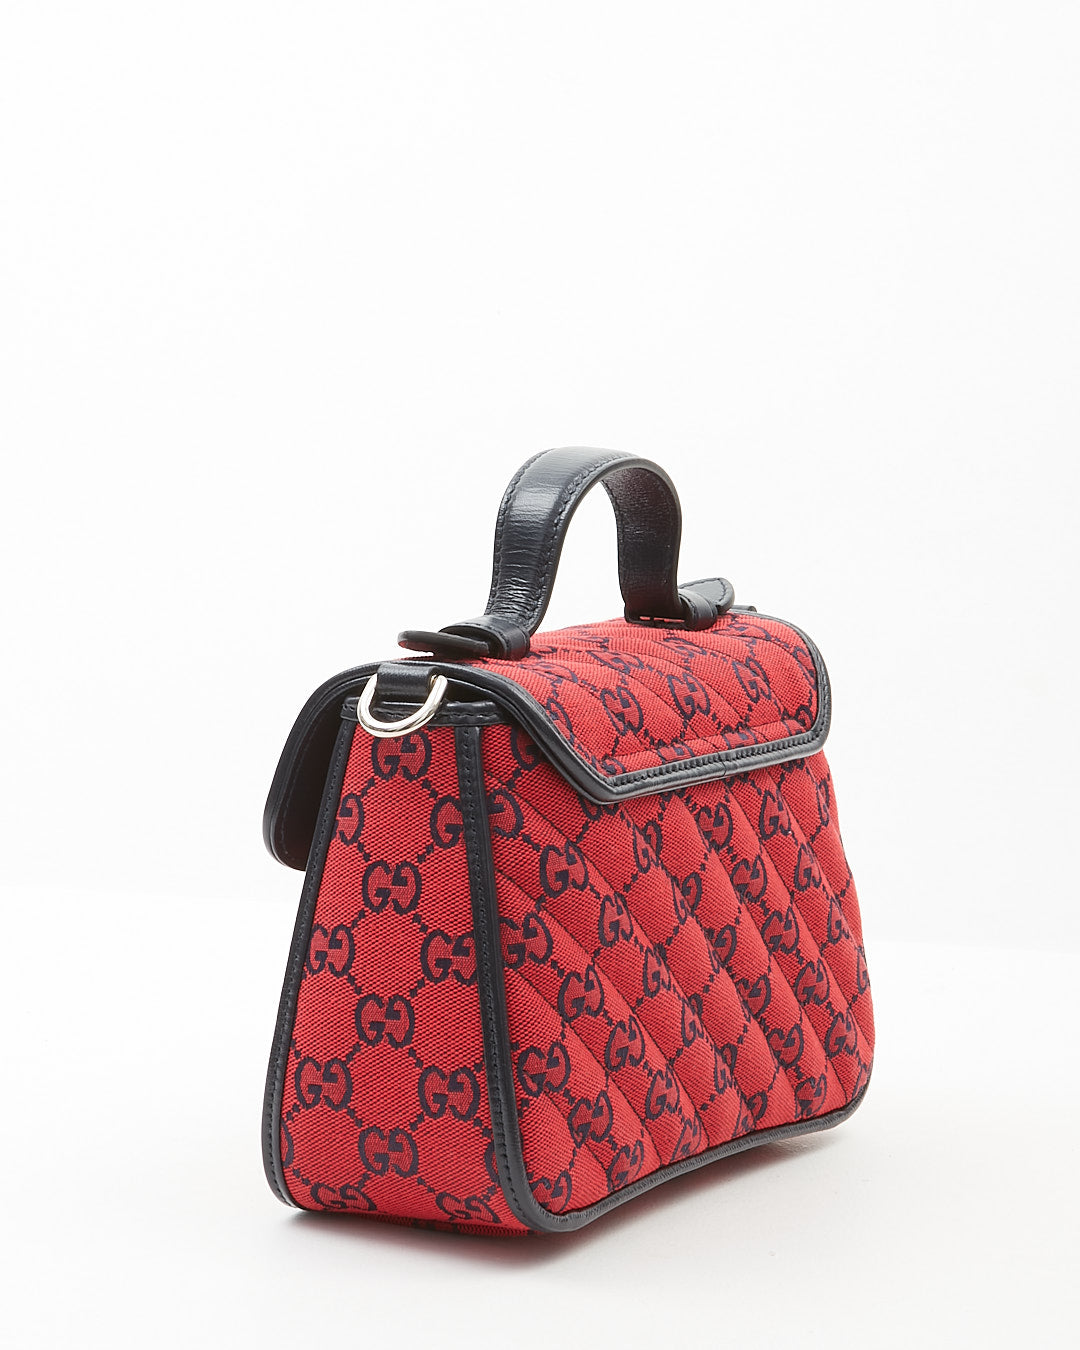 Gucci LIMITED EDITION Red and Black GG Monogram Marmont Mini Satchel